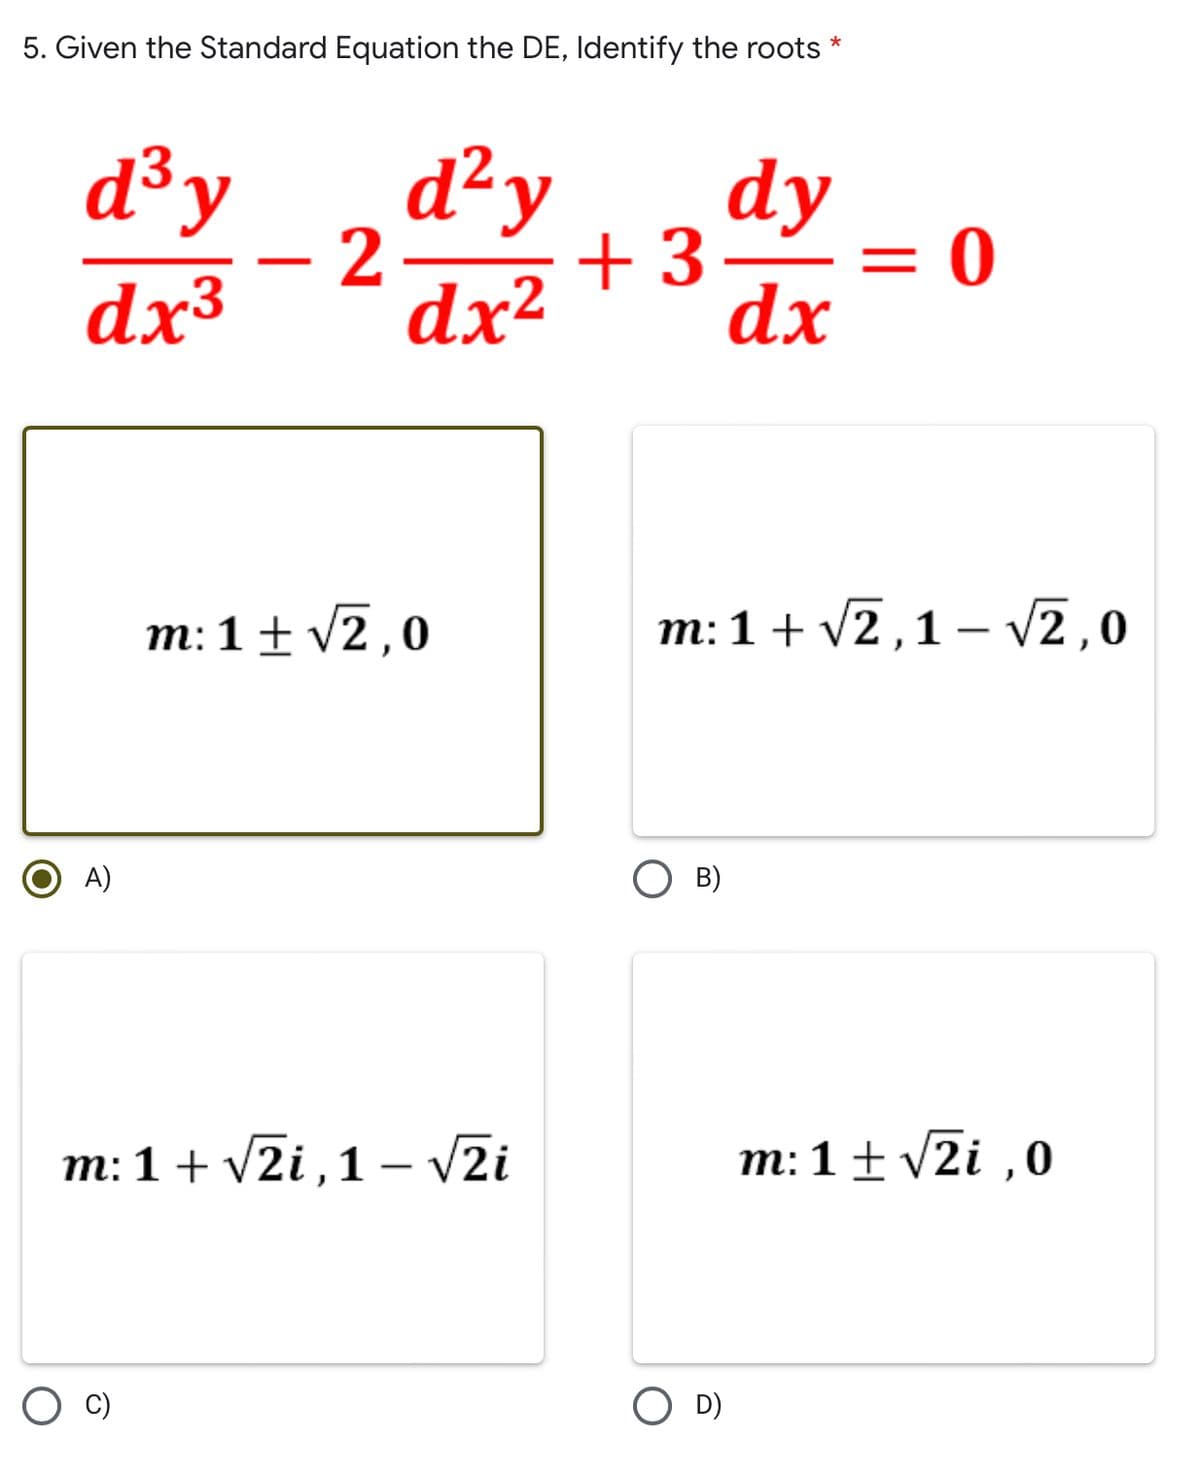 5. Given the Standard Equation the DE, Identify the roots
d³ y
dx³
d²y
dx²
dy
dx
= 0
m: 1+√√2,1-√√2,0
B)
m: 1 ± √2i,0
-
2
m: 1 ± √2,0
A)
m: 1 + √2i, 1-√√2i
+3
D)